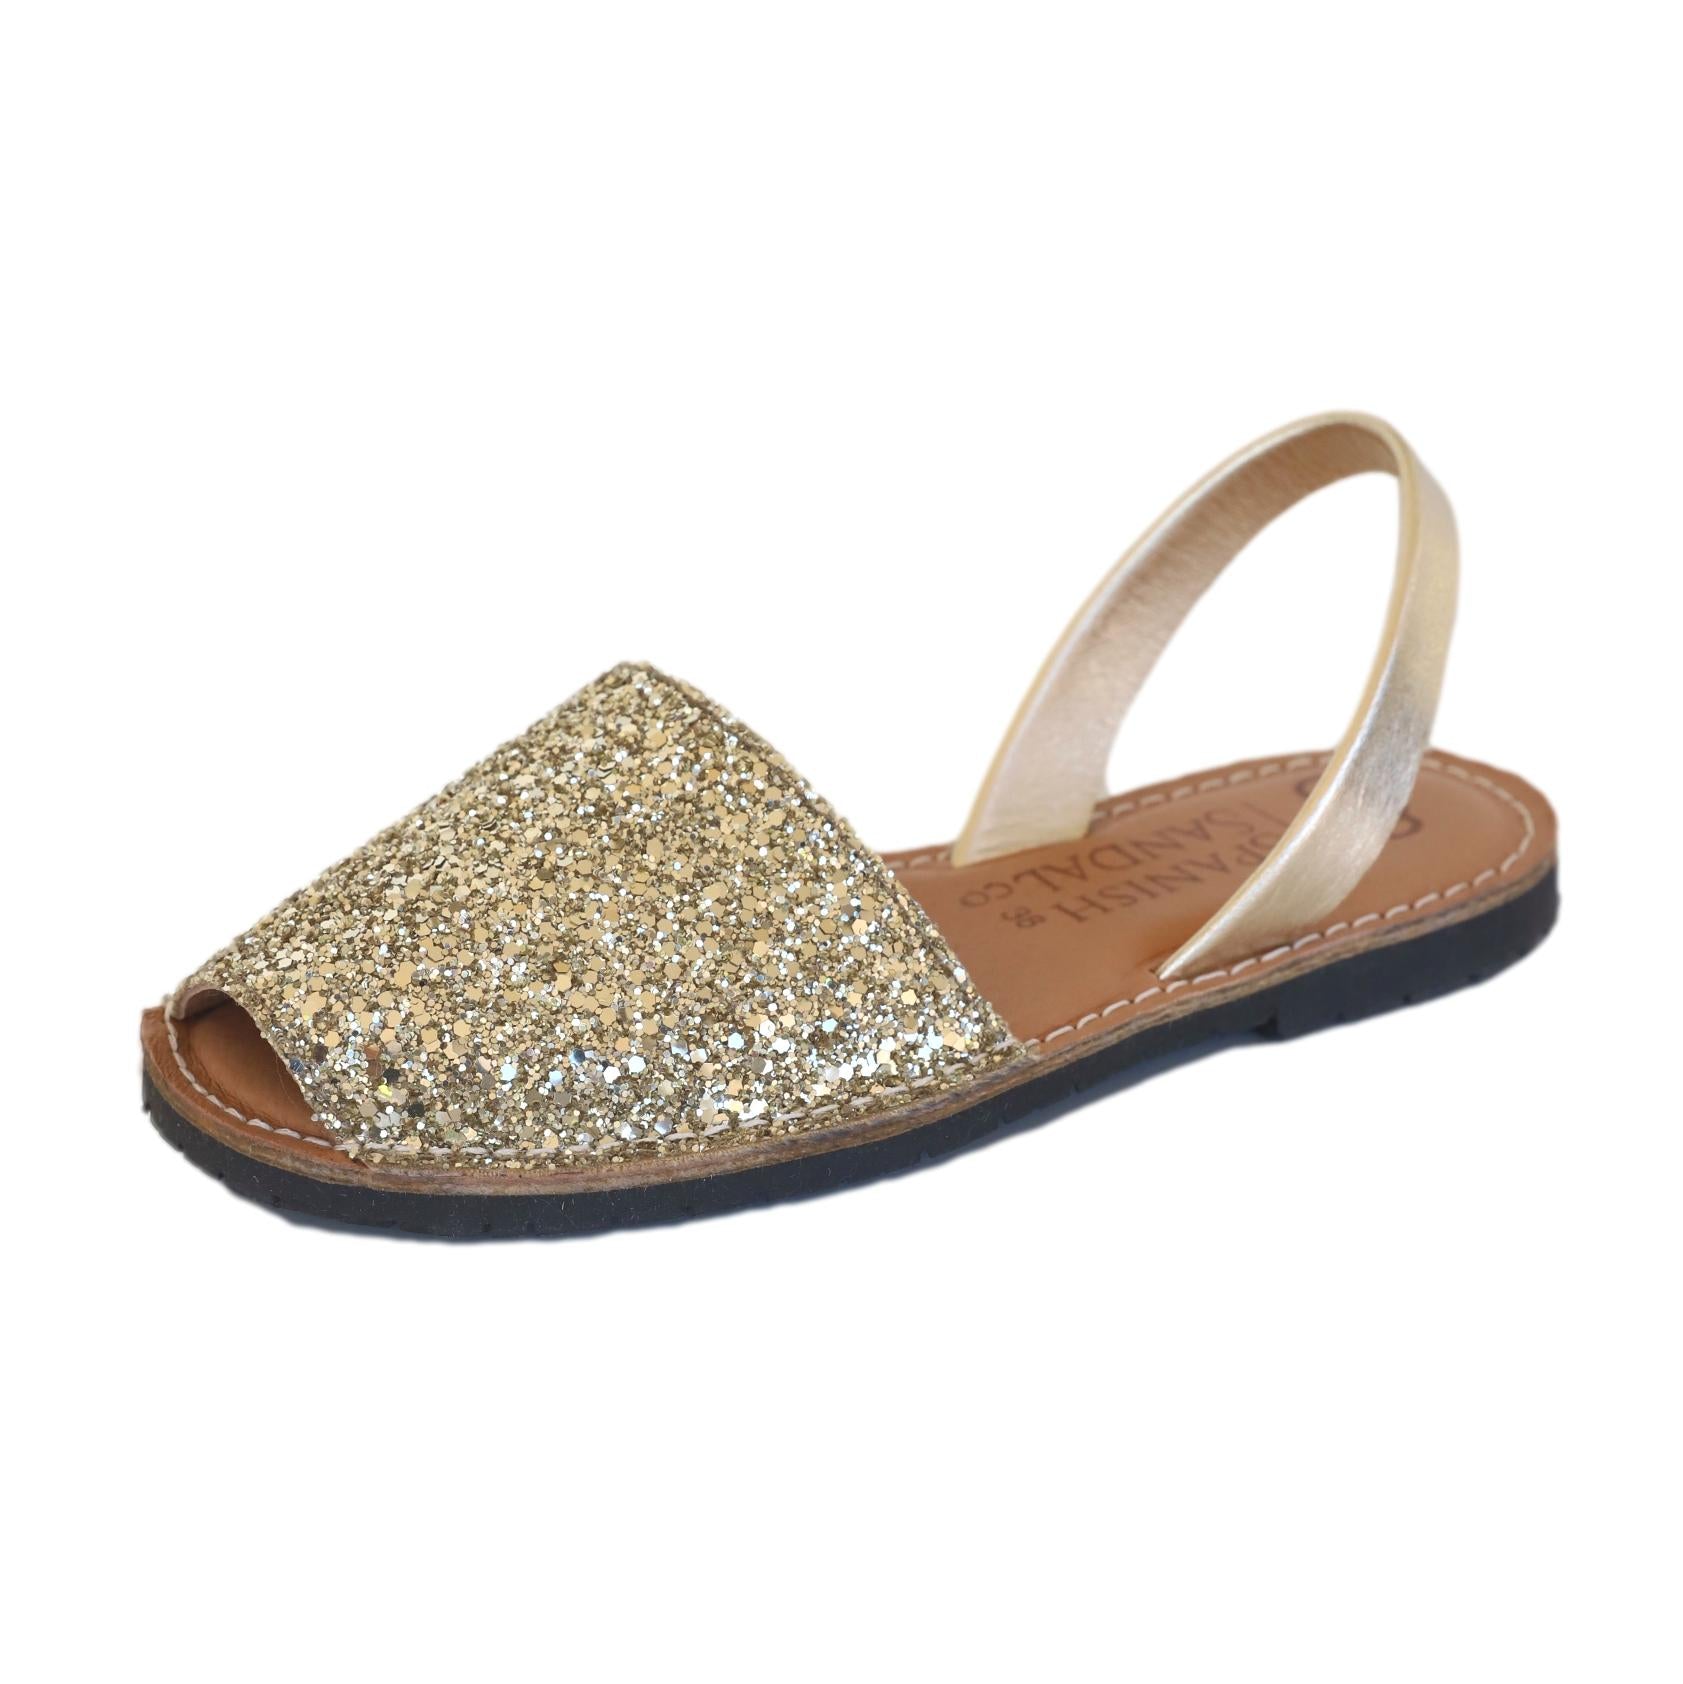 Gold sparkly flat sandals